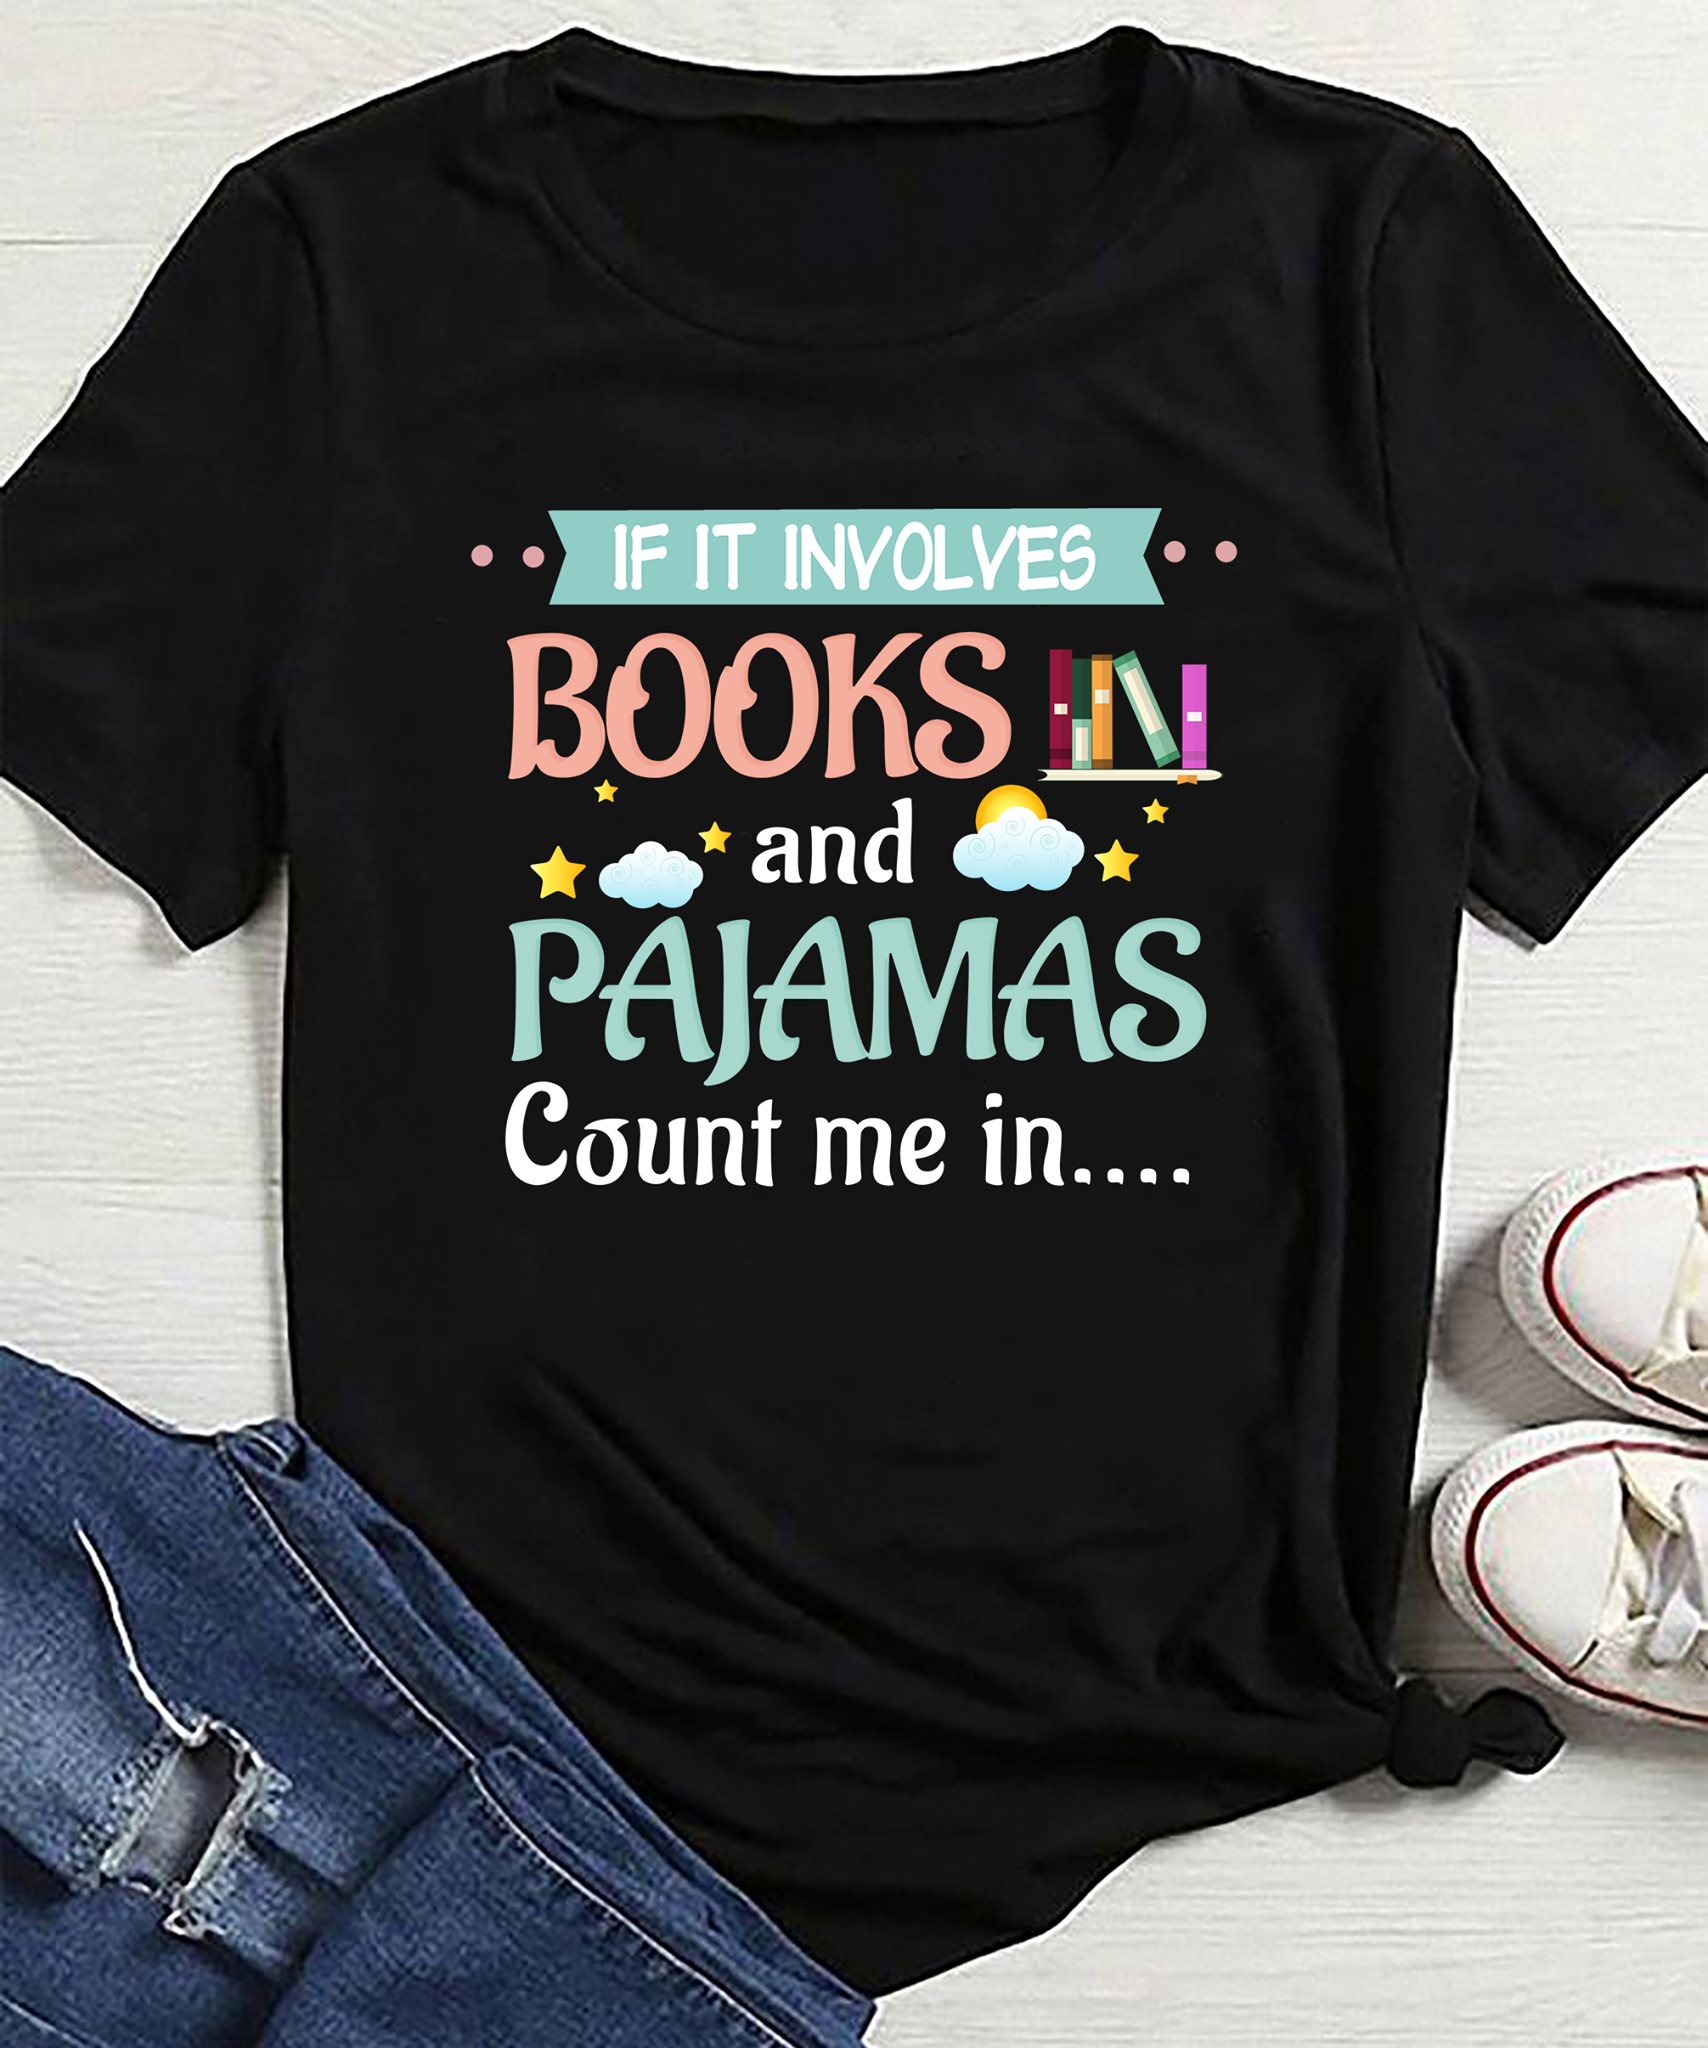 If it involves books and pajamas count me in - Book lover